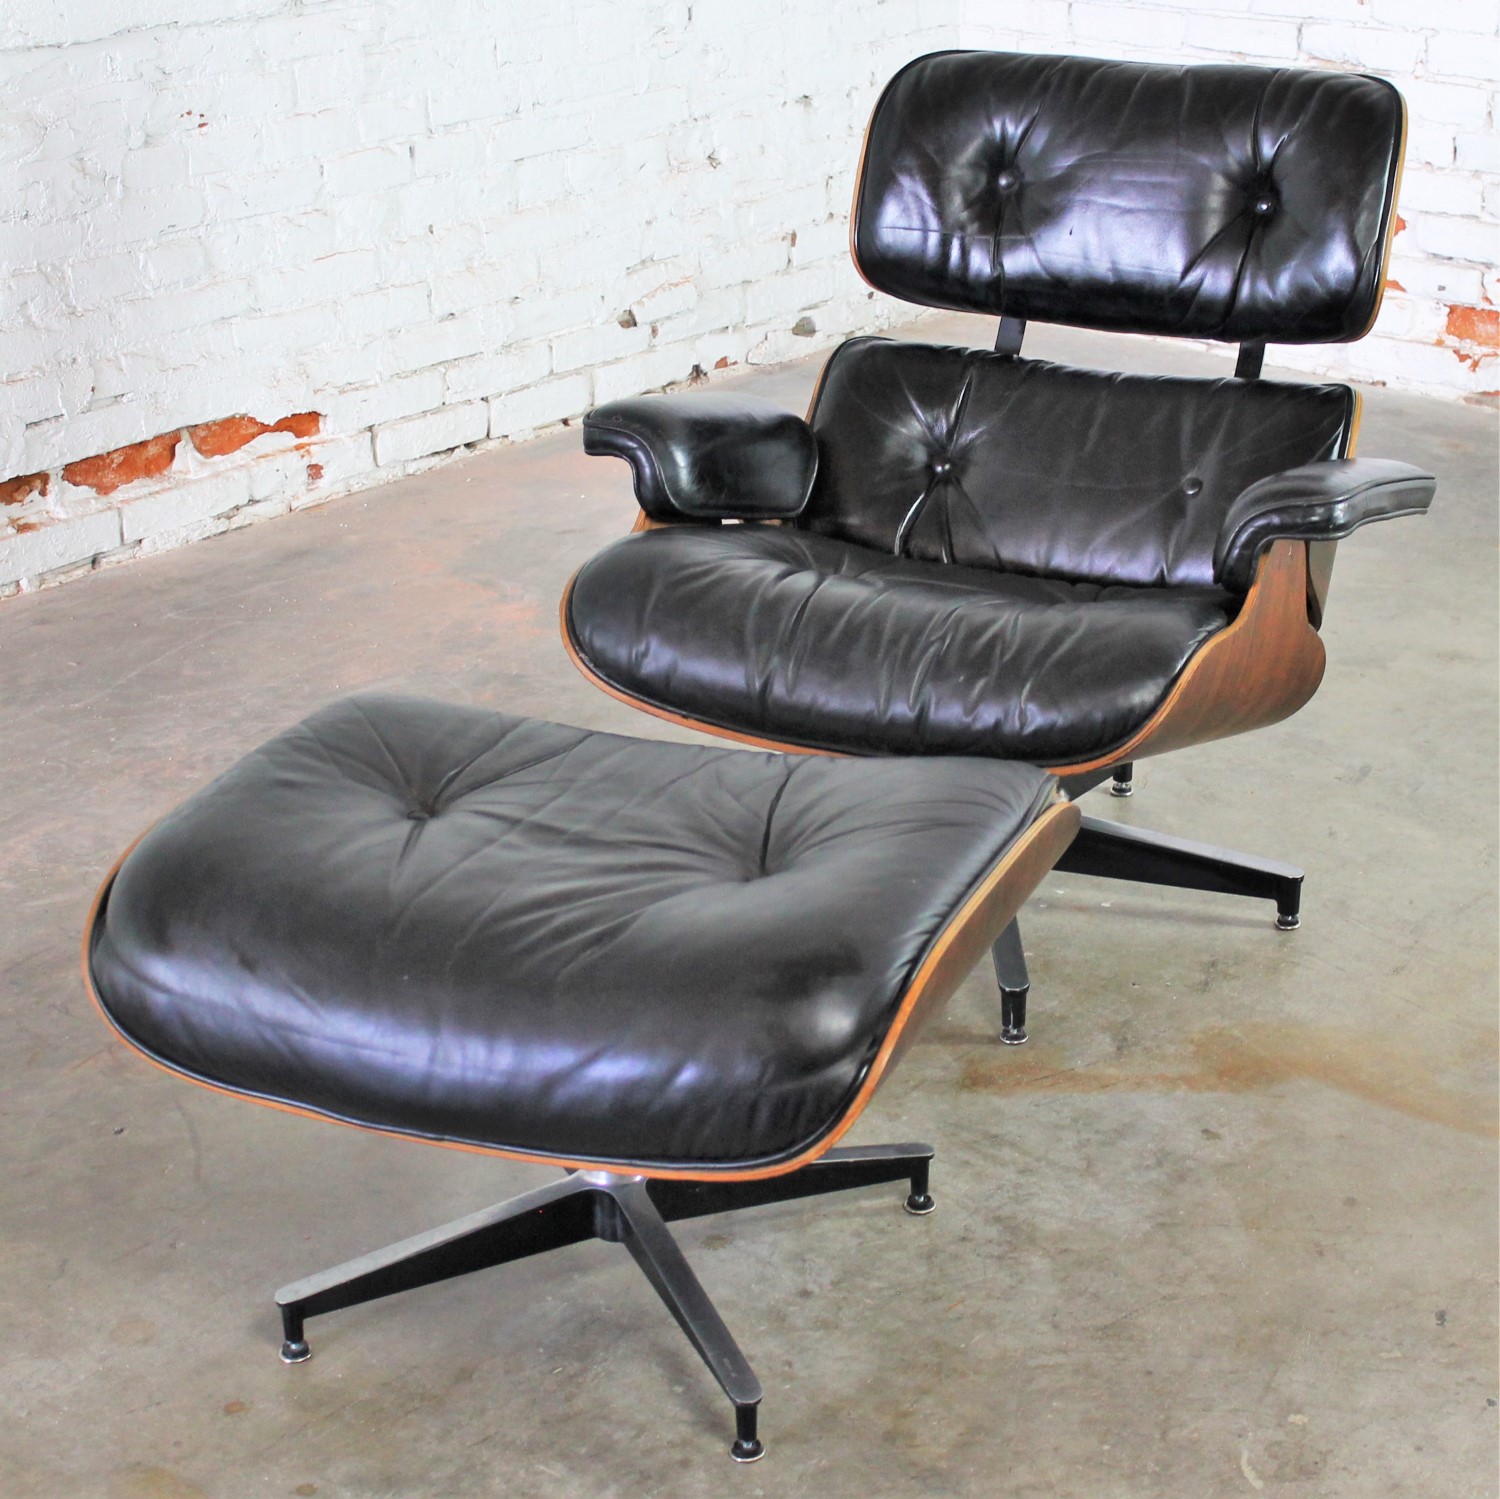 Vintage Eames Lounge Chair & Ottoman in Black Leather & Rosewood by Herman Miller 670/671